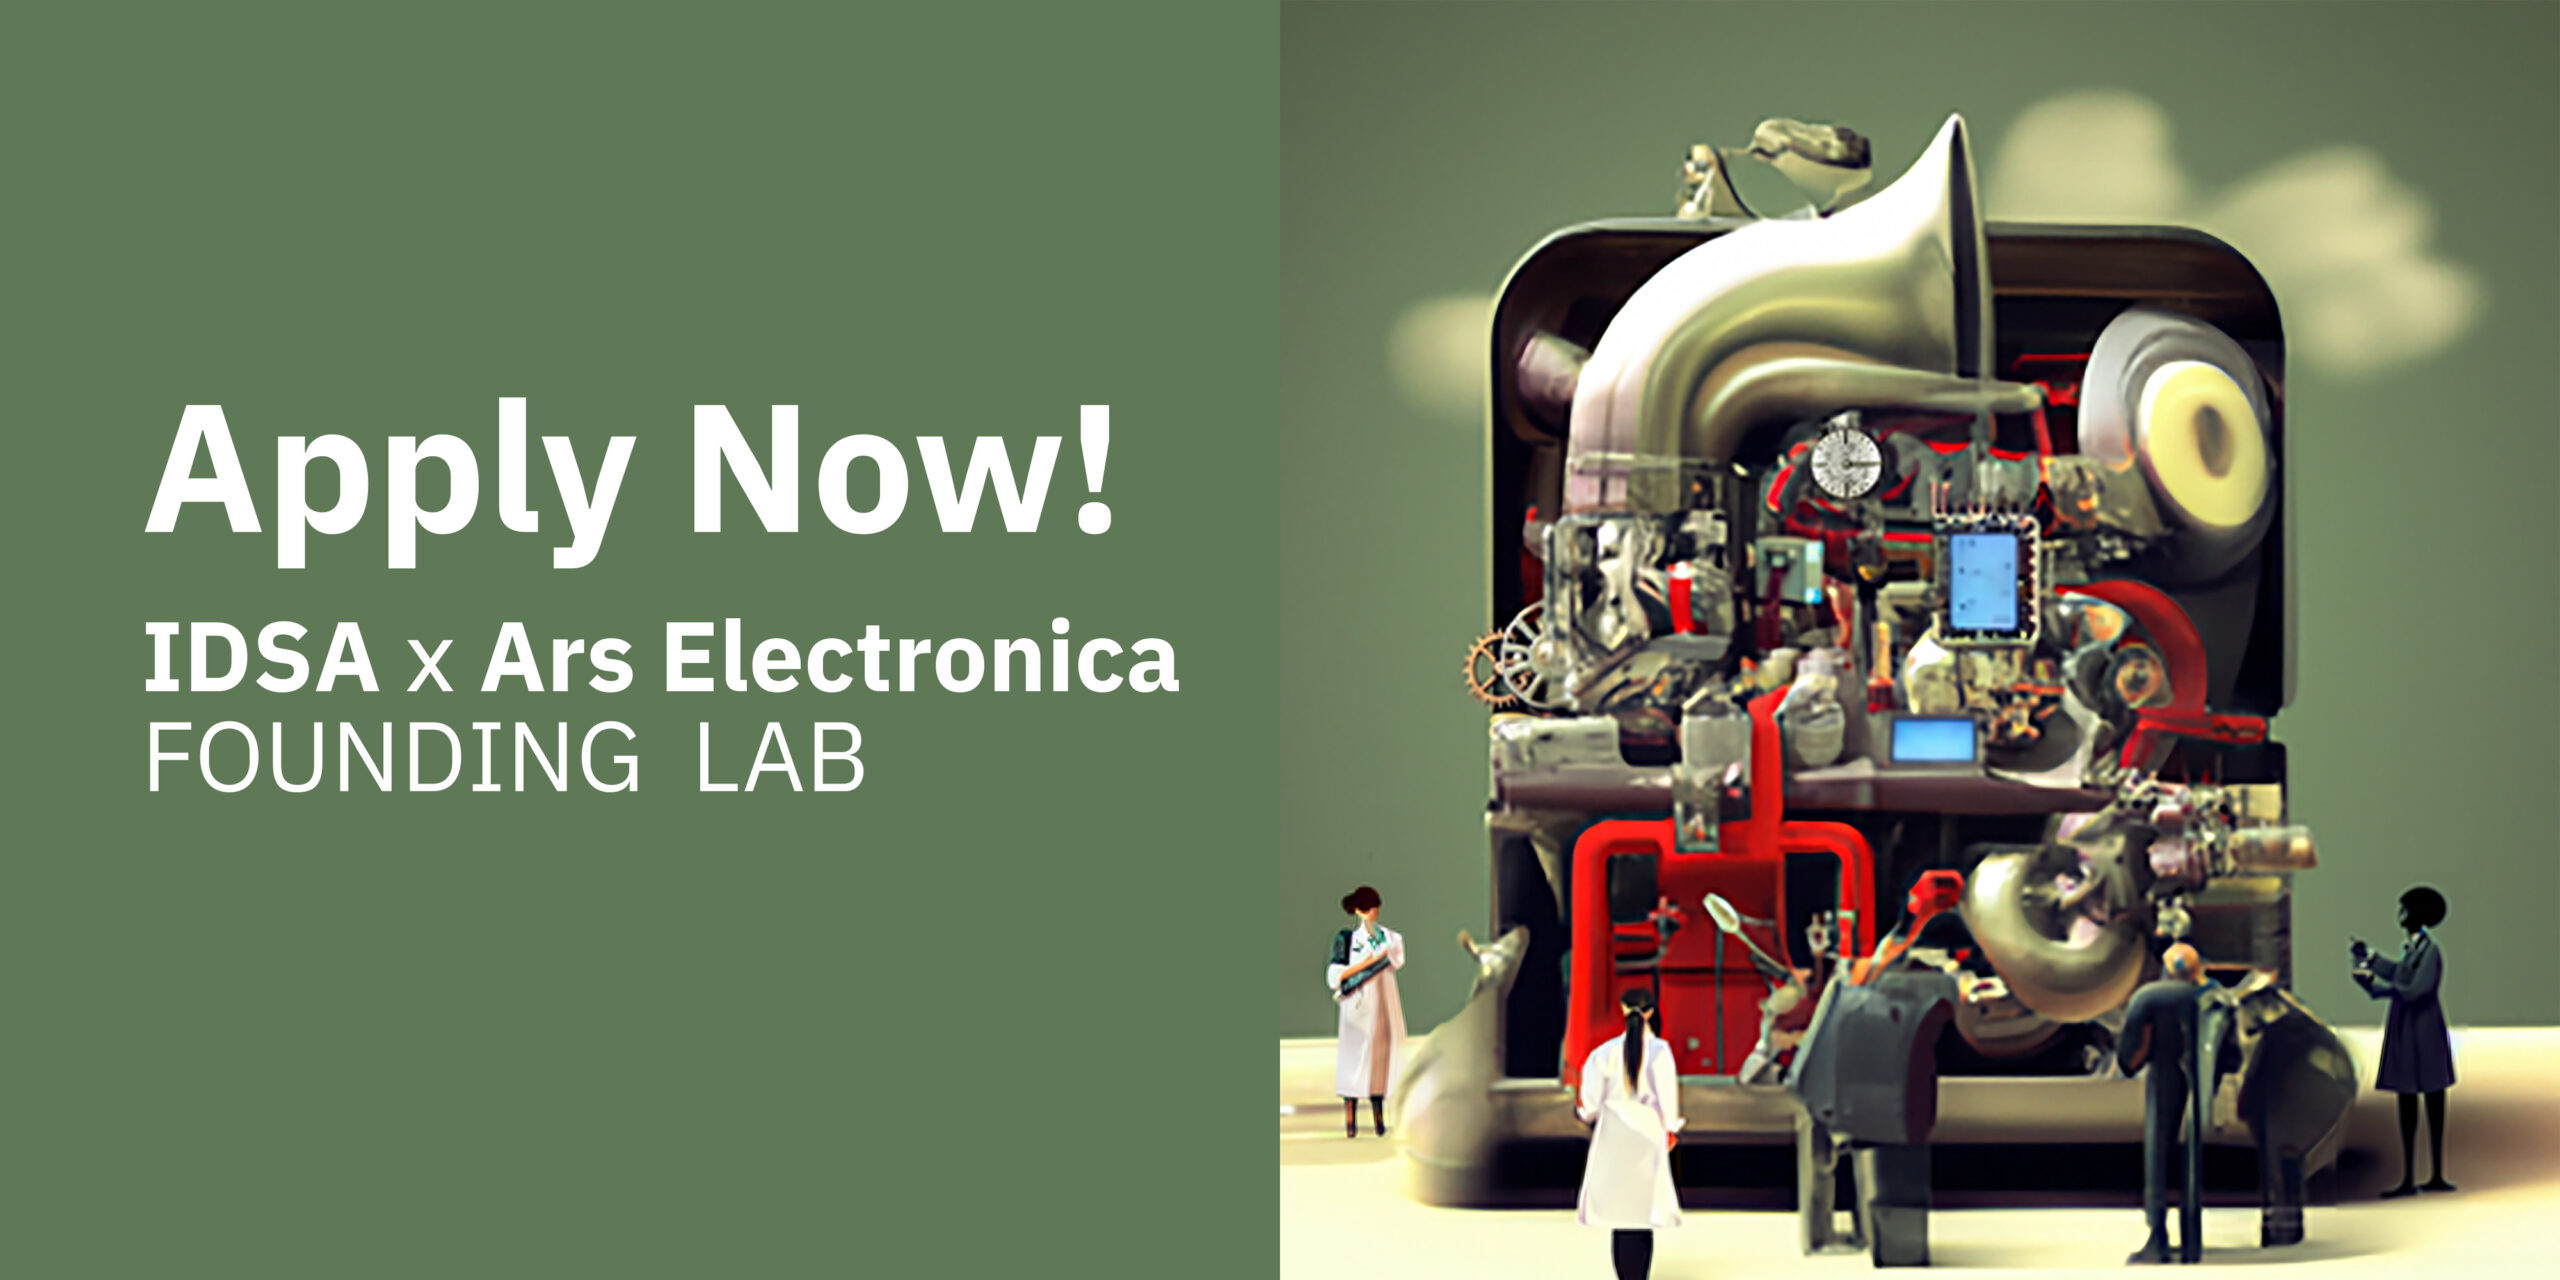 IDSA and Ars Electronica launch FOUNDING LAB